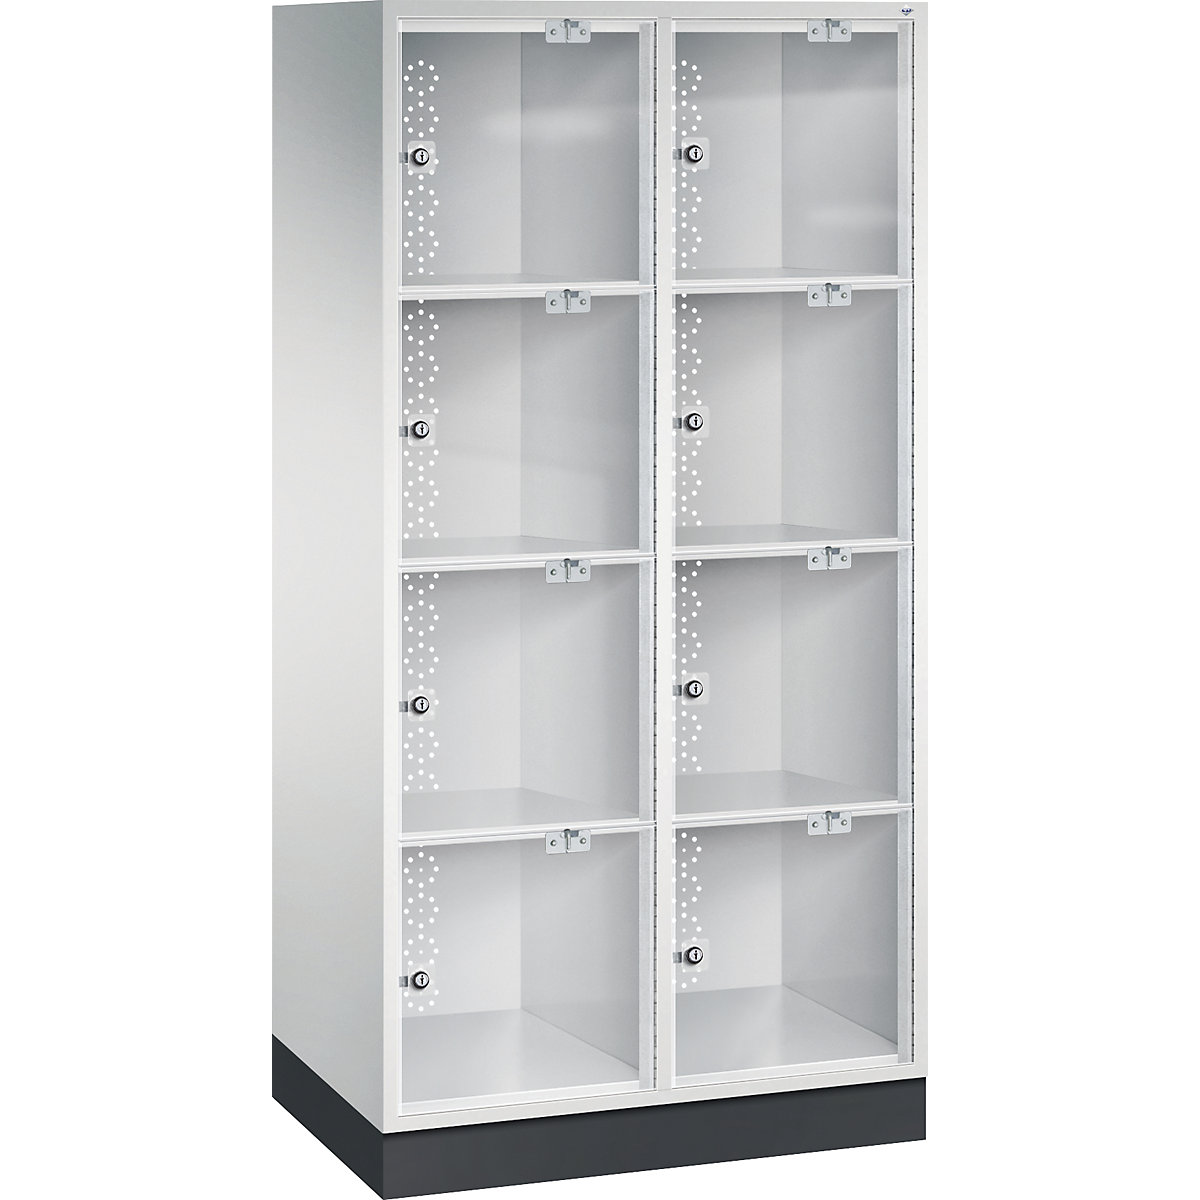 INTRO steel compartment locker with acrylic glass door – C+P, HxWxD 1750 x 820 x 500 mm, compartment height 380 mm, 8 compartments, light grey body